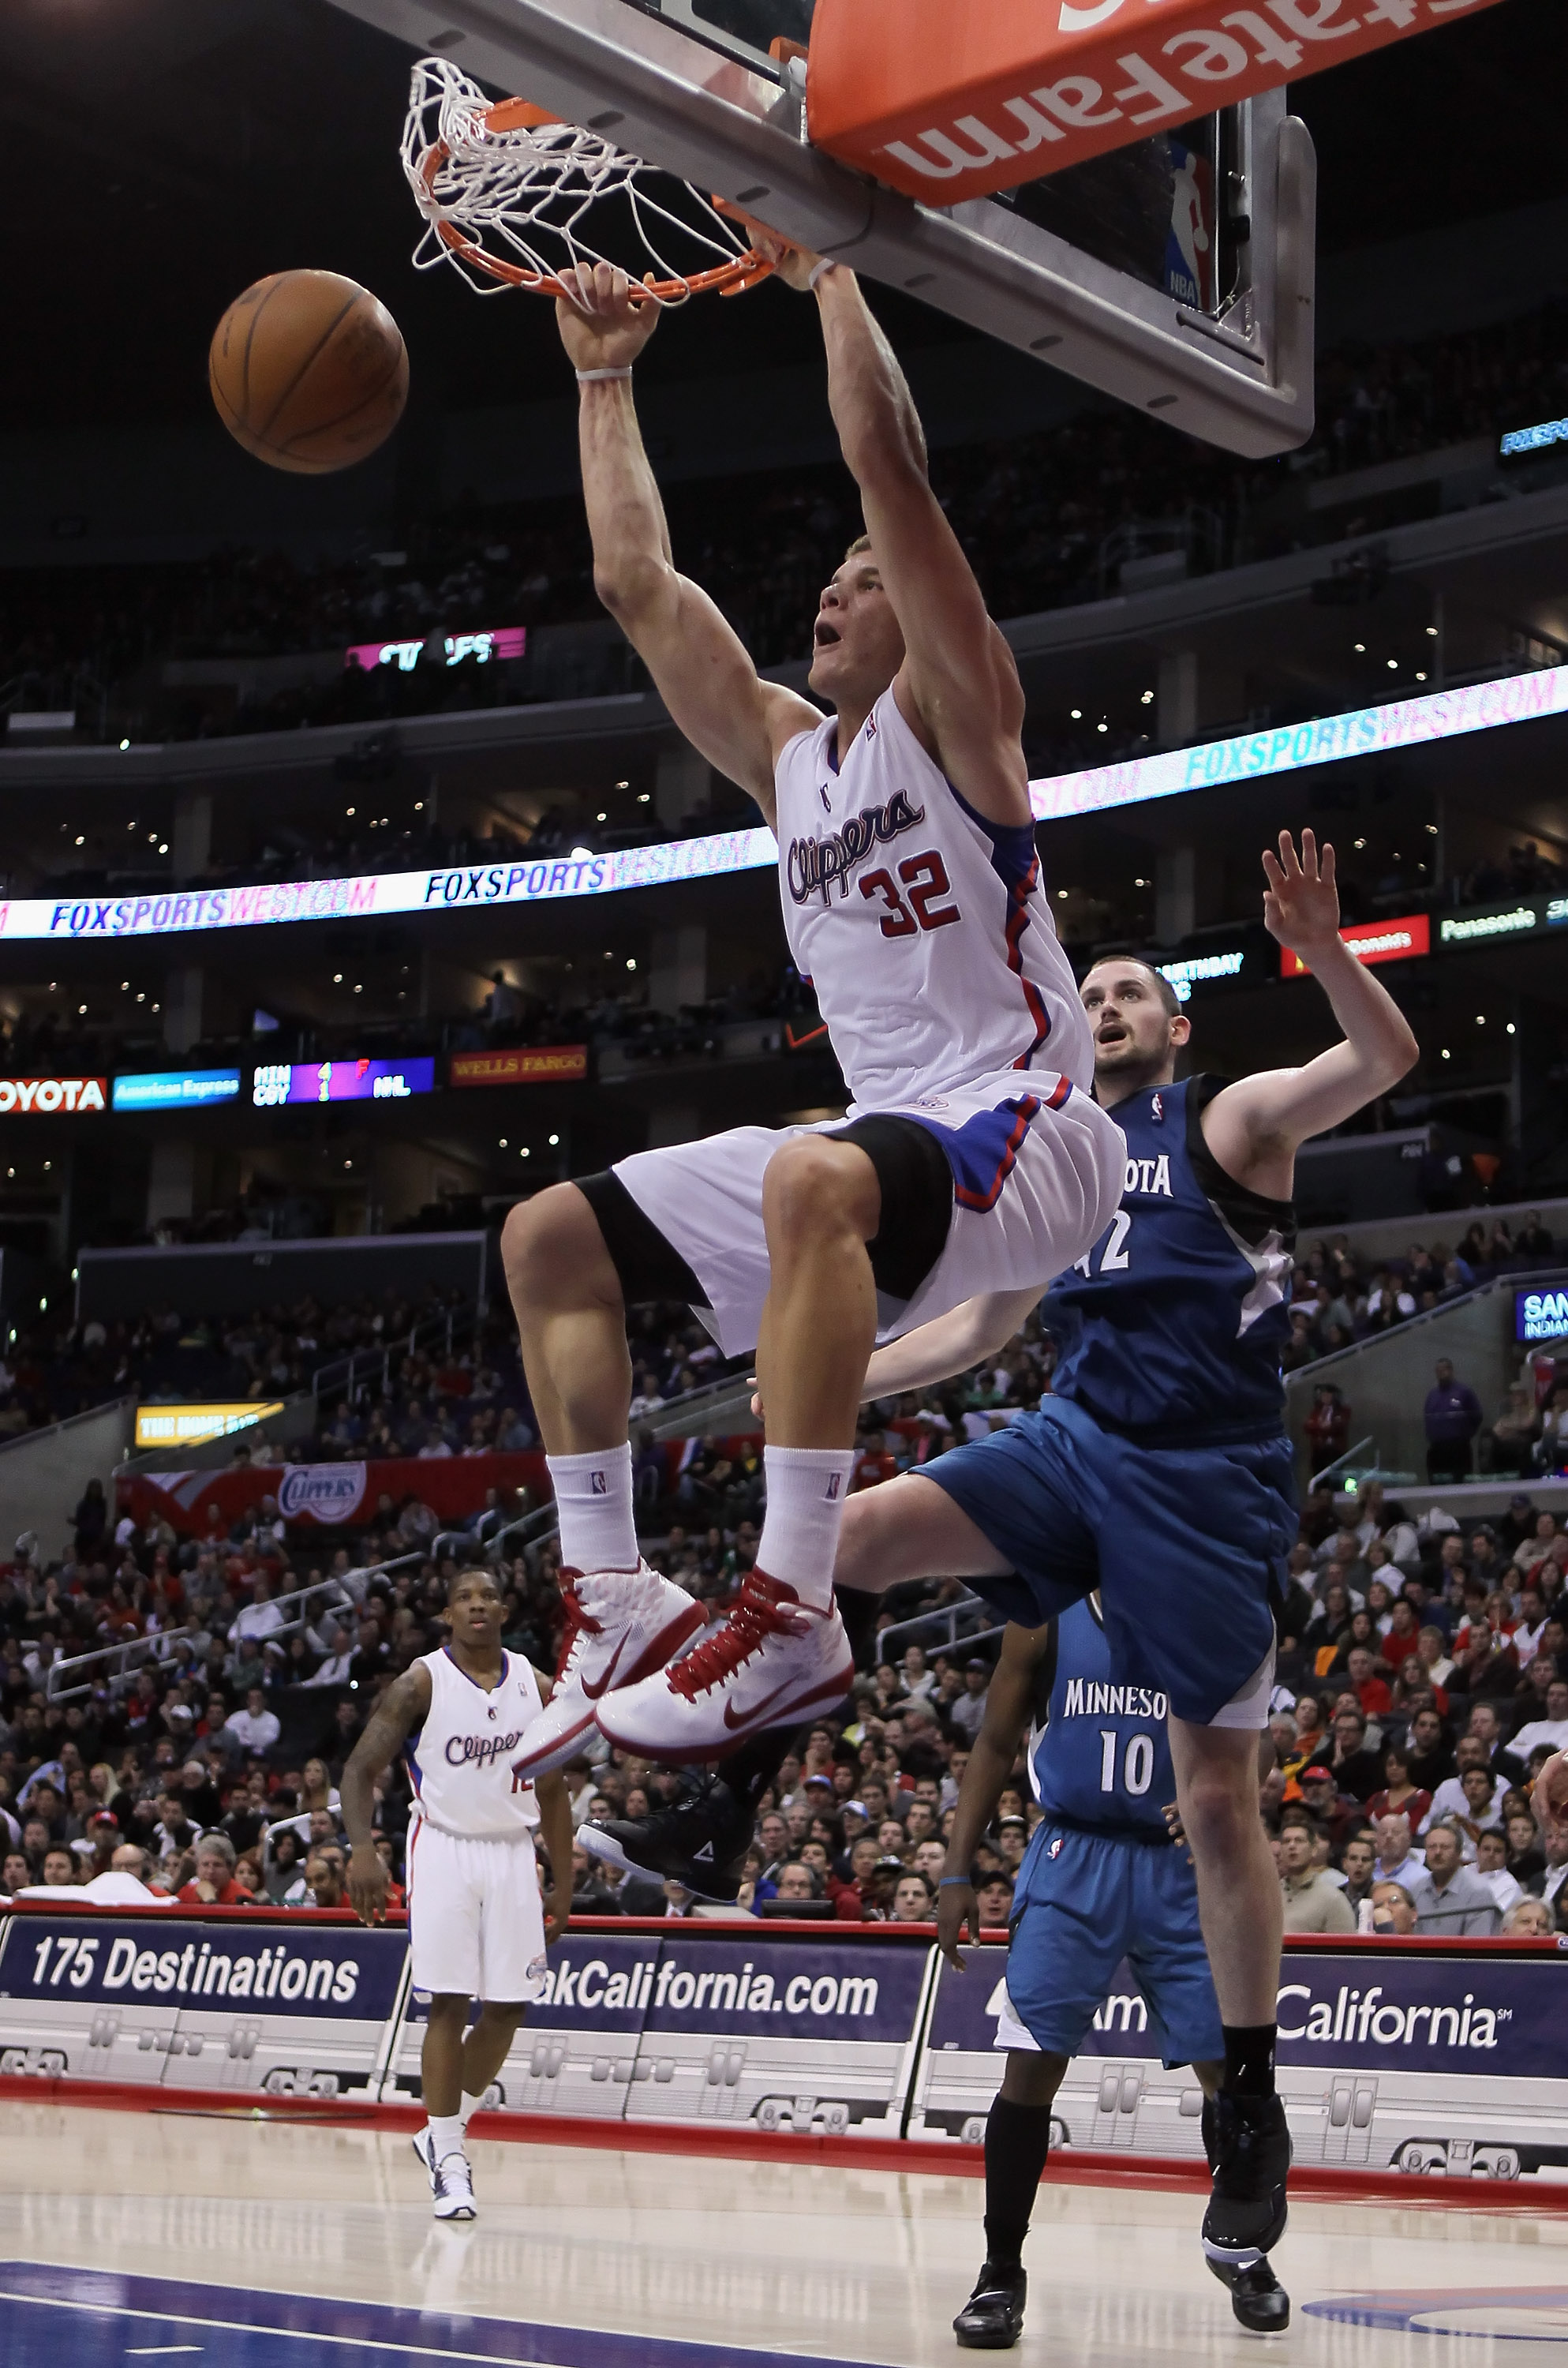 LOS ANGELES, CA - DECEMBER 20:  Blake Griffin #32 of the Los Angeles Clippers drives past Kevin Love #42 of the Minnesota Timberwolves for a dunk during the second half at Staples Center on December 20, 2010 in Los Angeles, California. The Clippers defeat